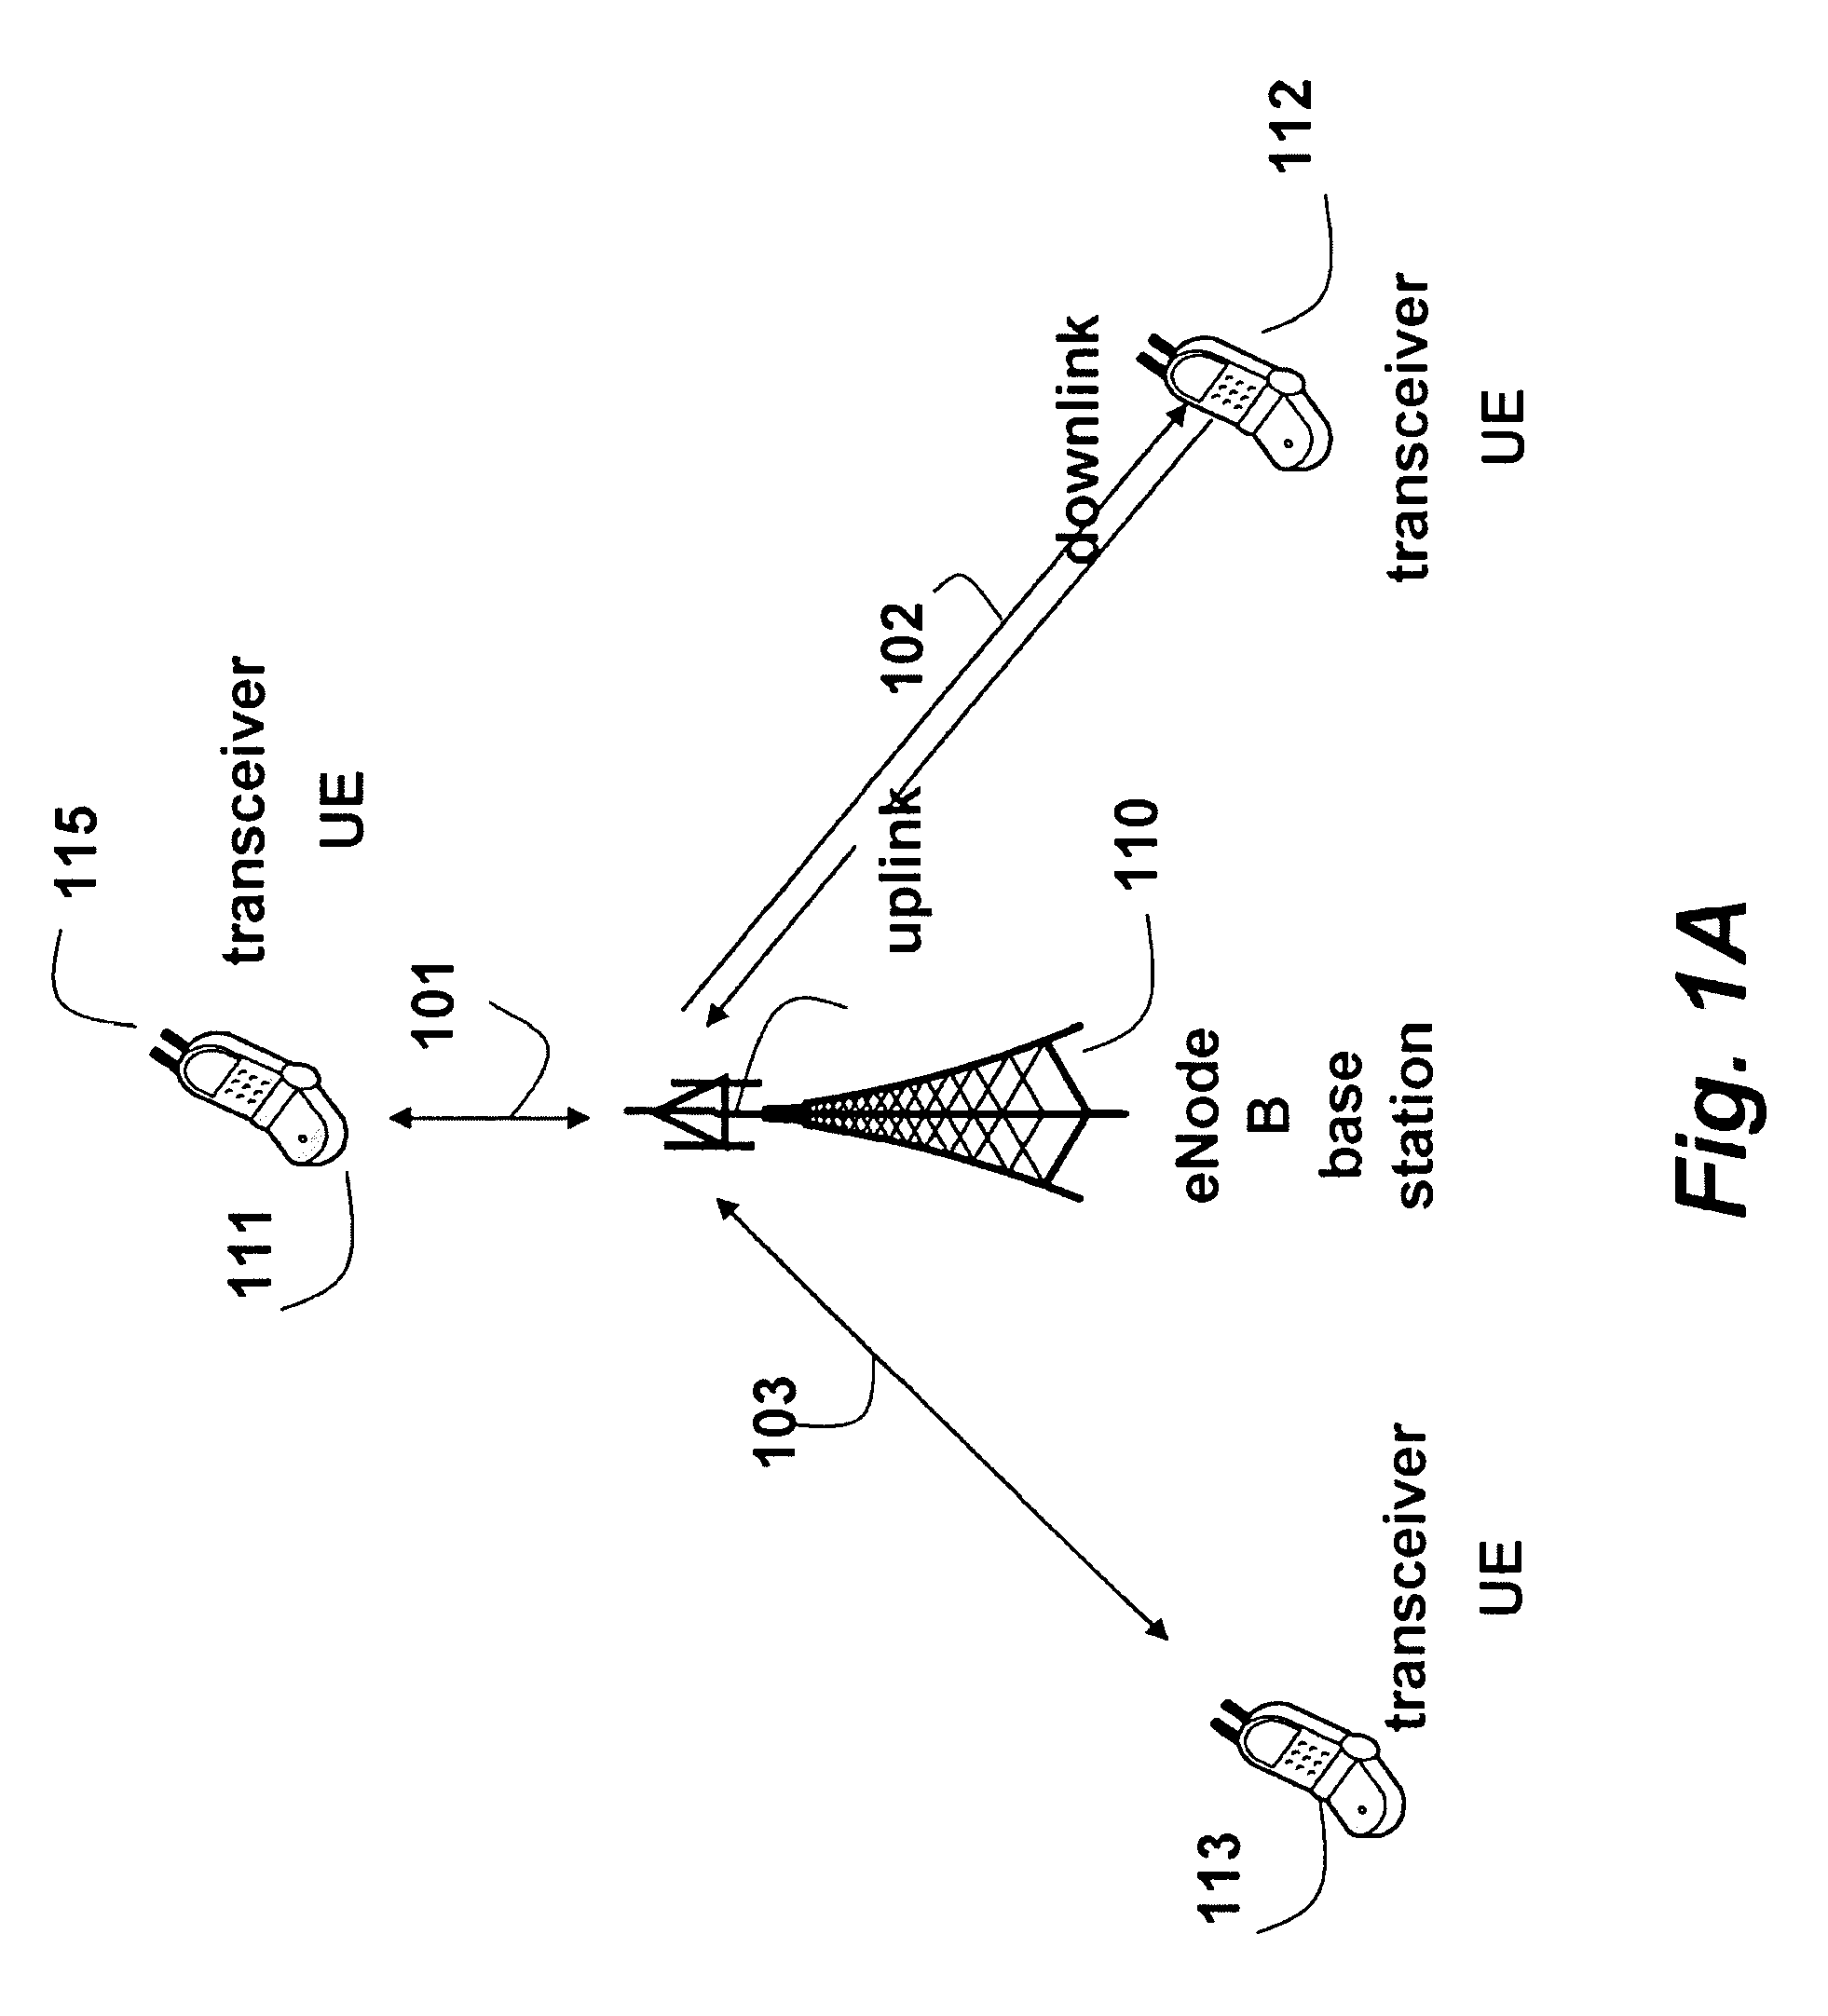 Method for Selecting Antennas in a Wireless Networks